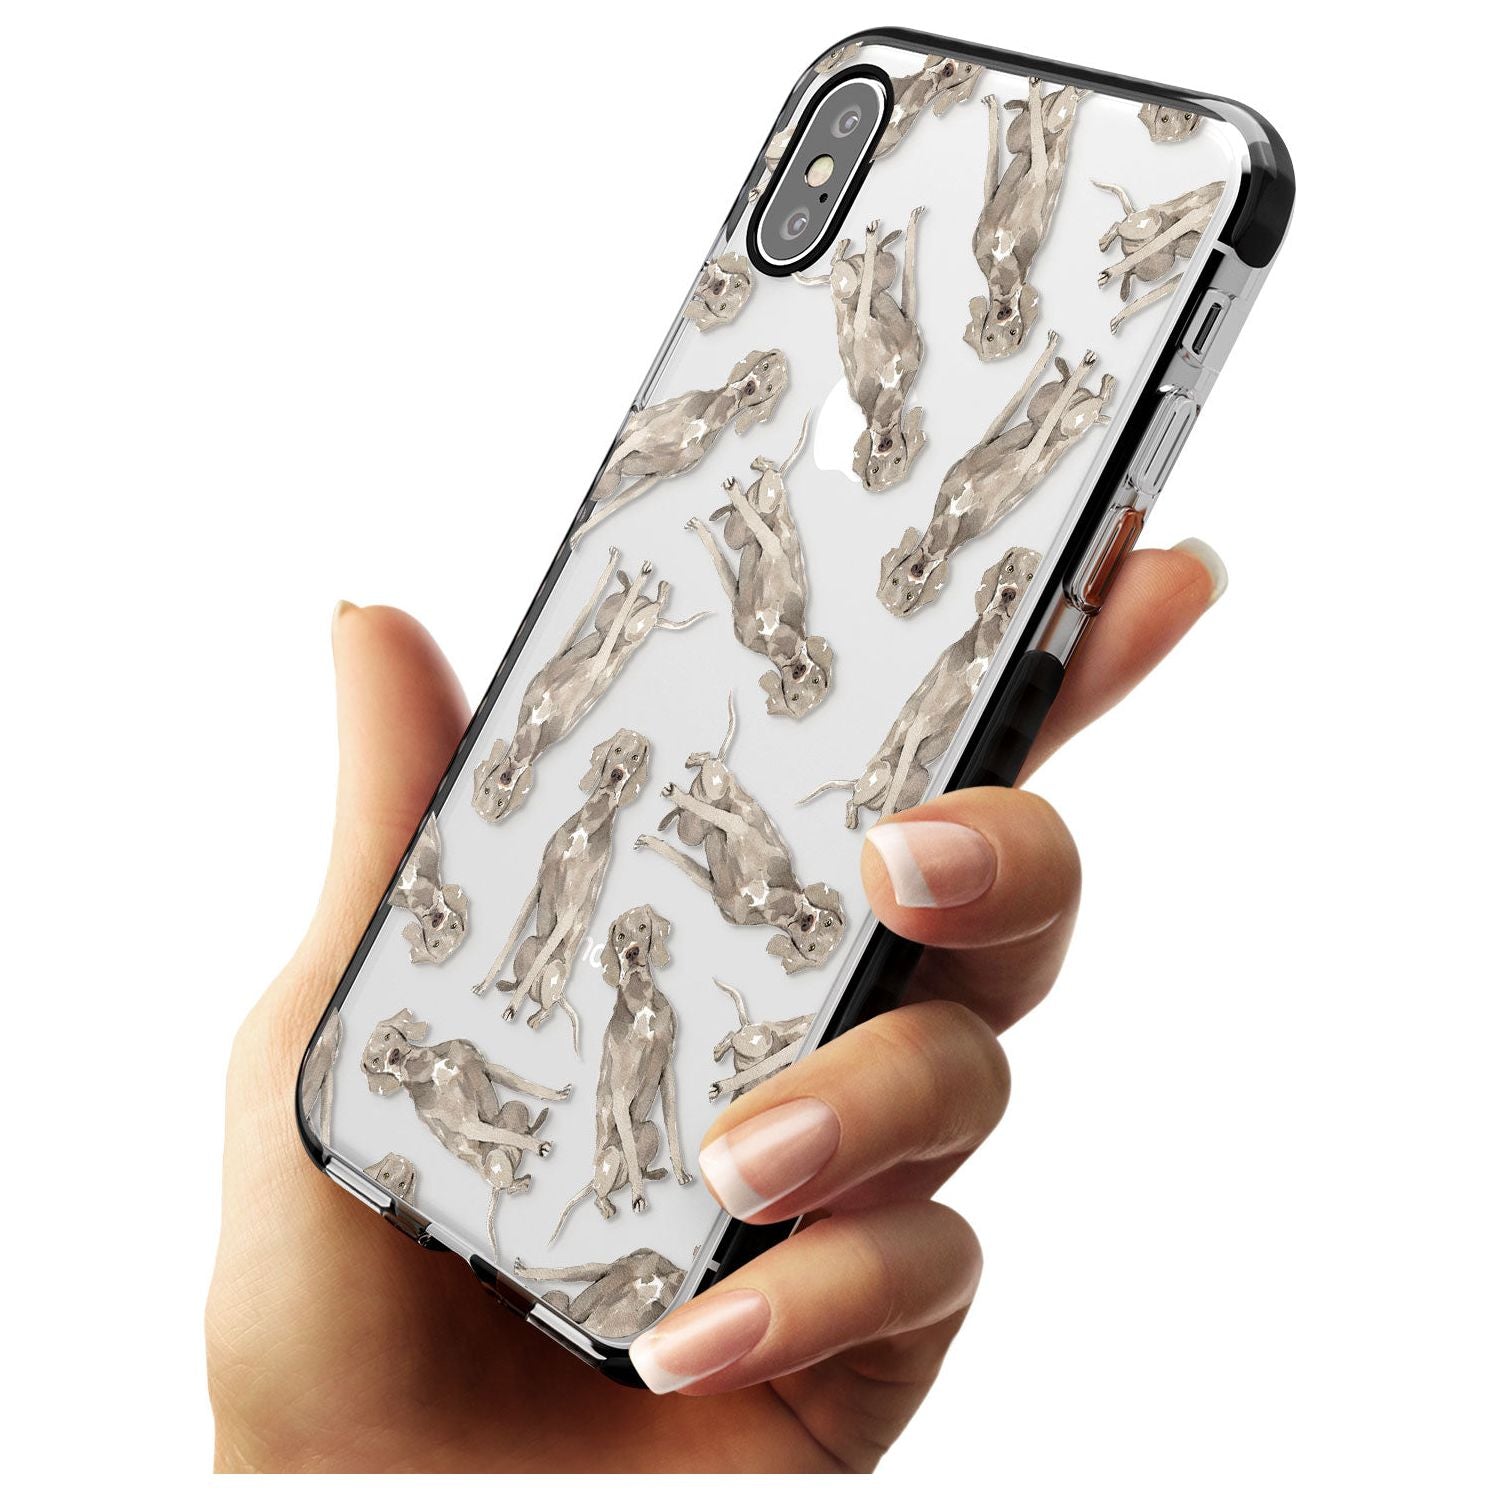 Weimaraner Watercolour Dog Pattern Black Impact Phone Case for iPhone X XS Max XR